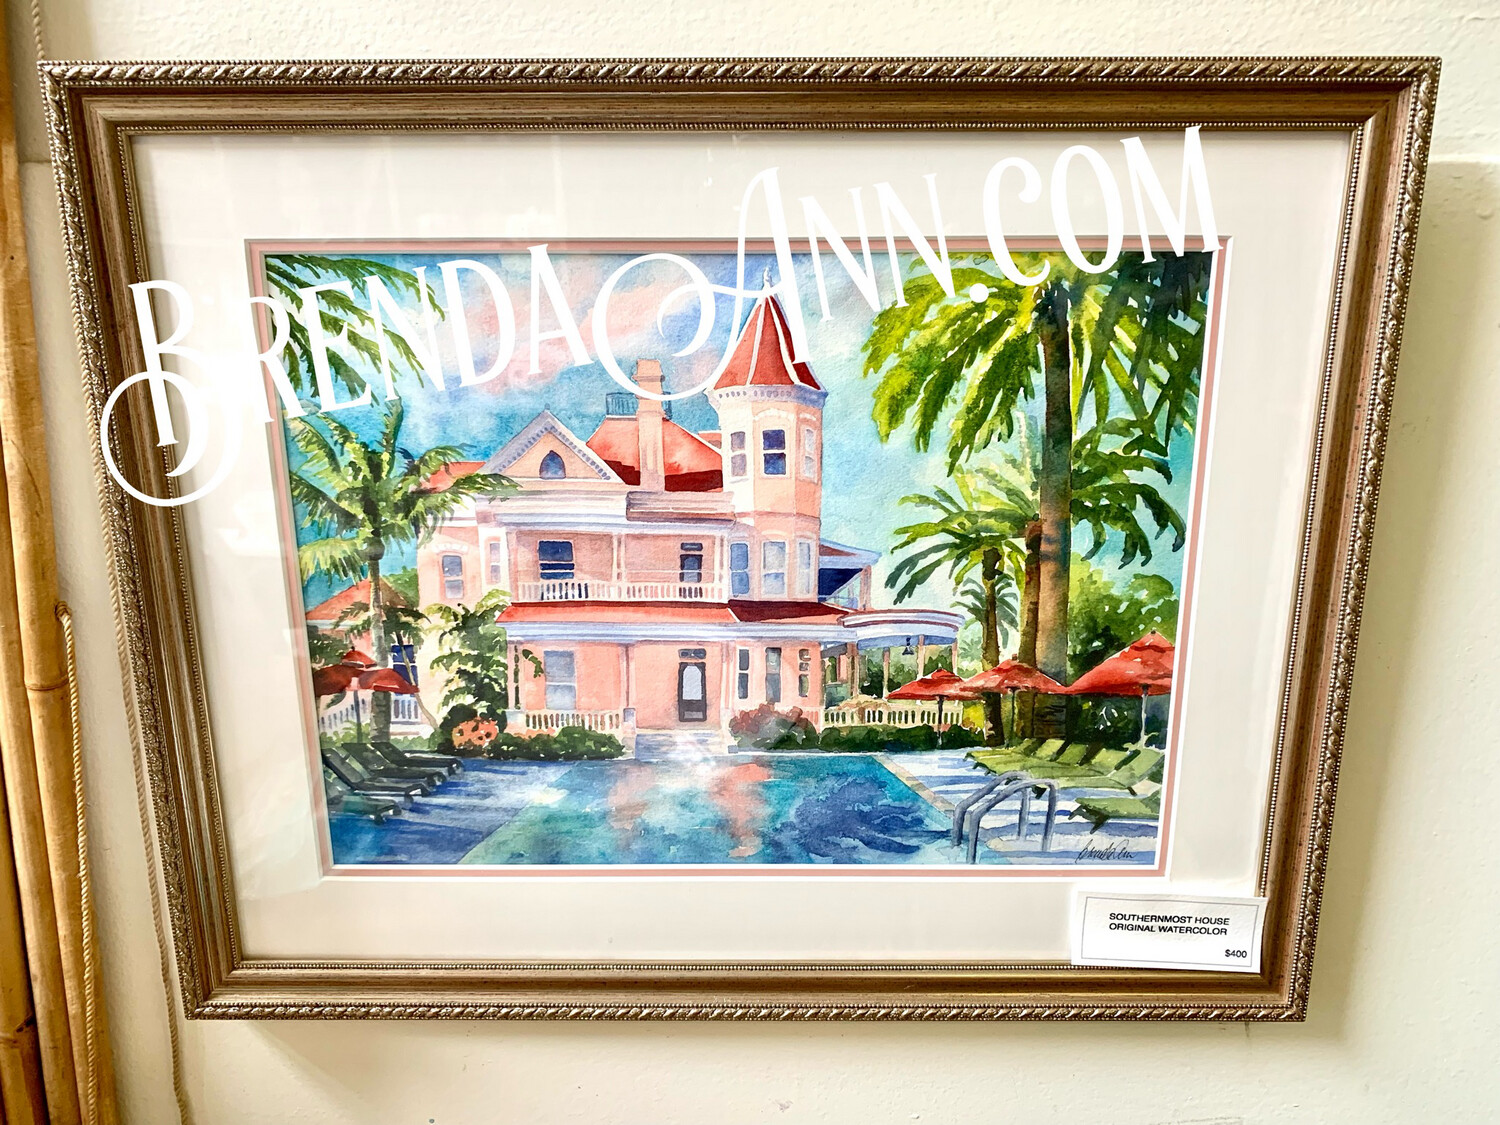 Key West Art - The Southernmost House Hotel FRAMED ORIGINAL Watercolor Painting